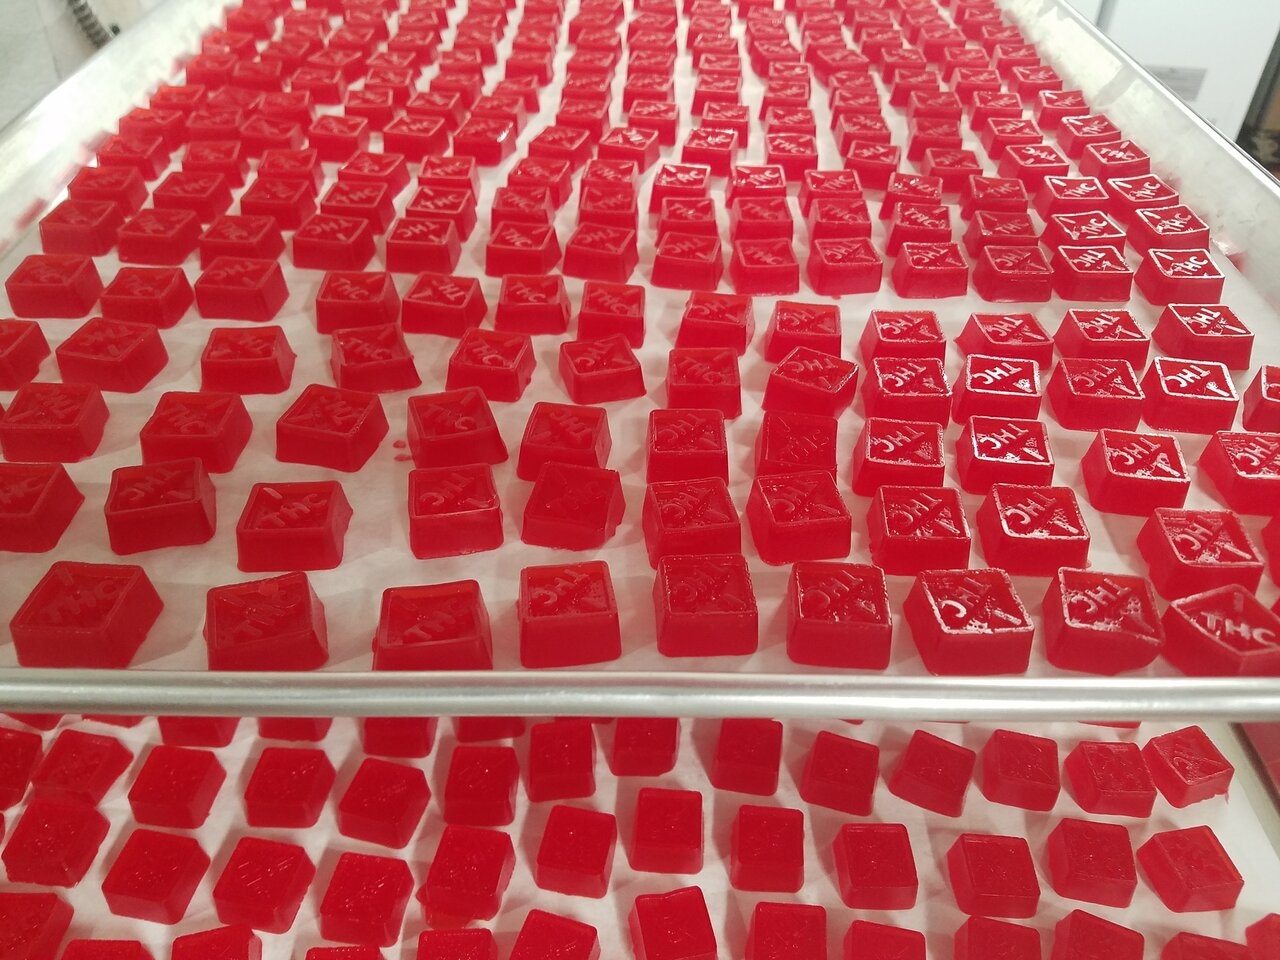 One or two gummies